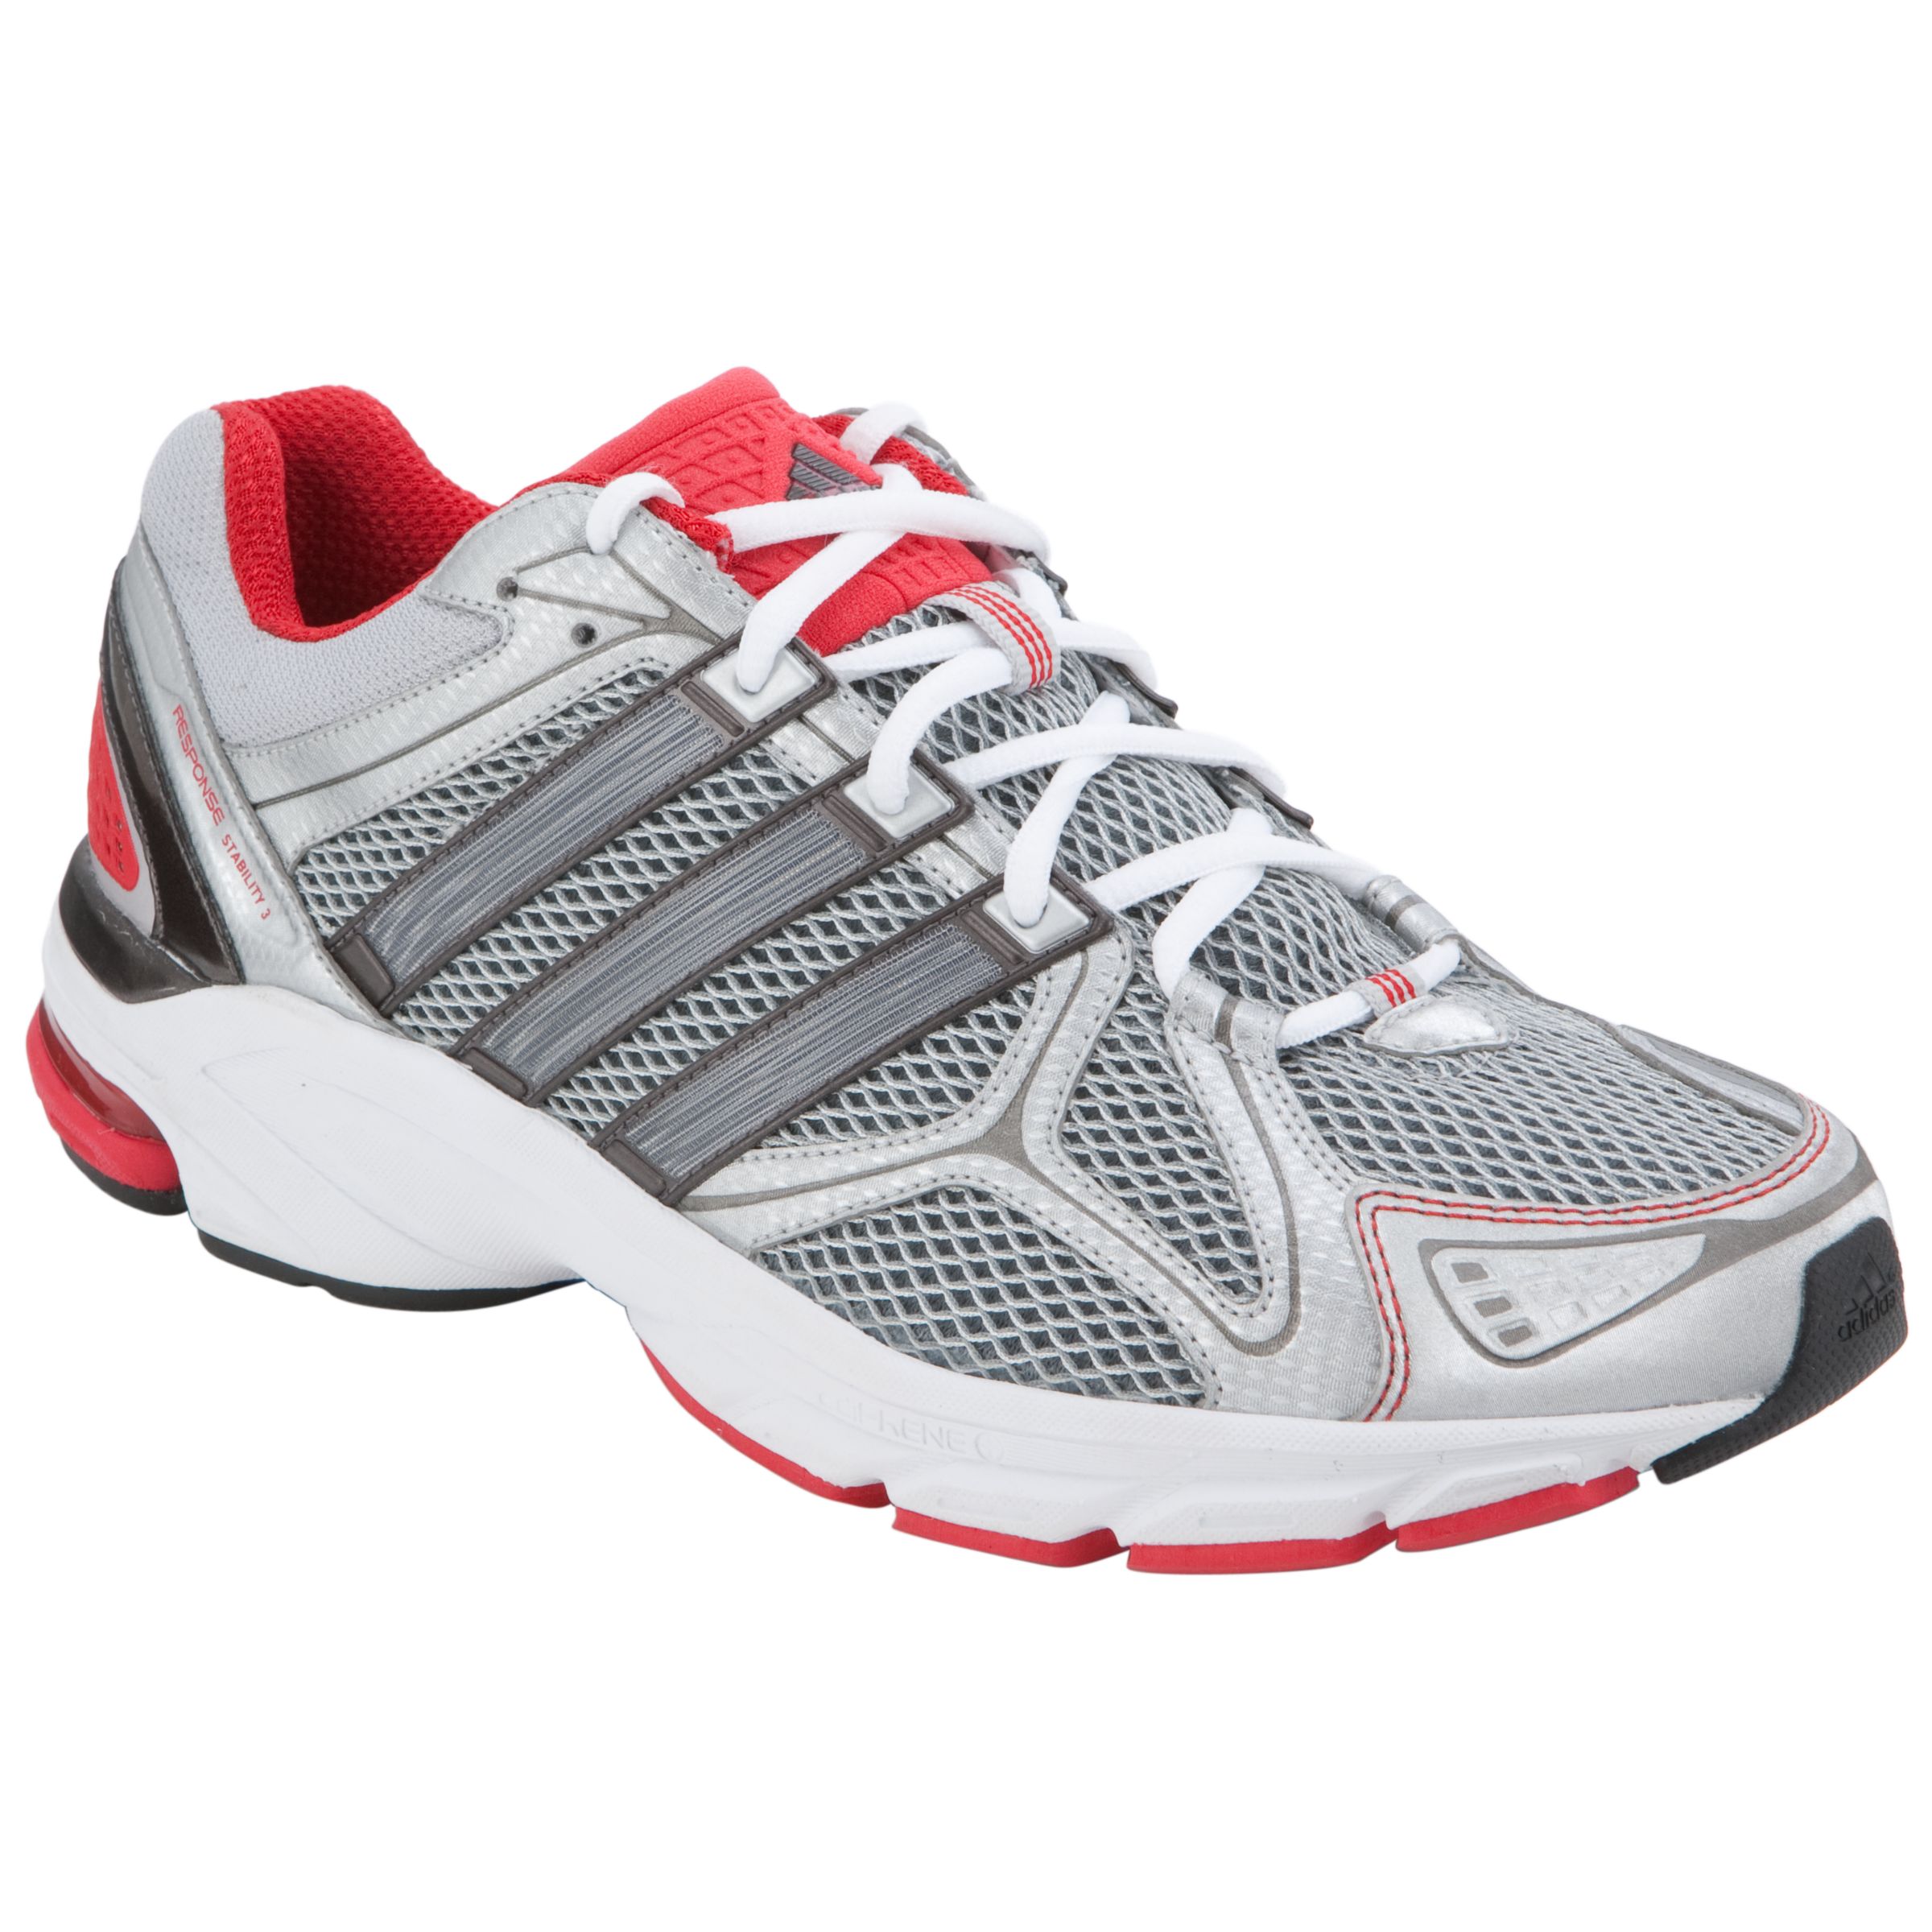 Adidas Response Stability Running Shoes,